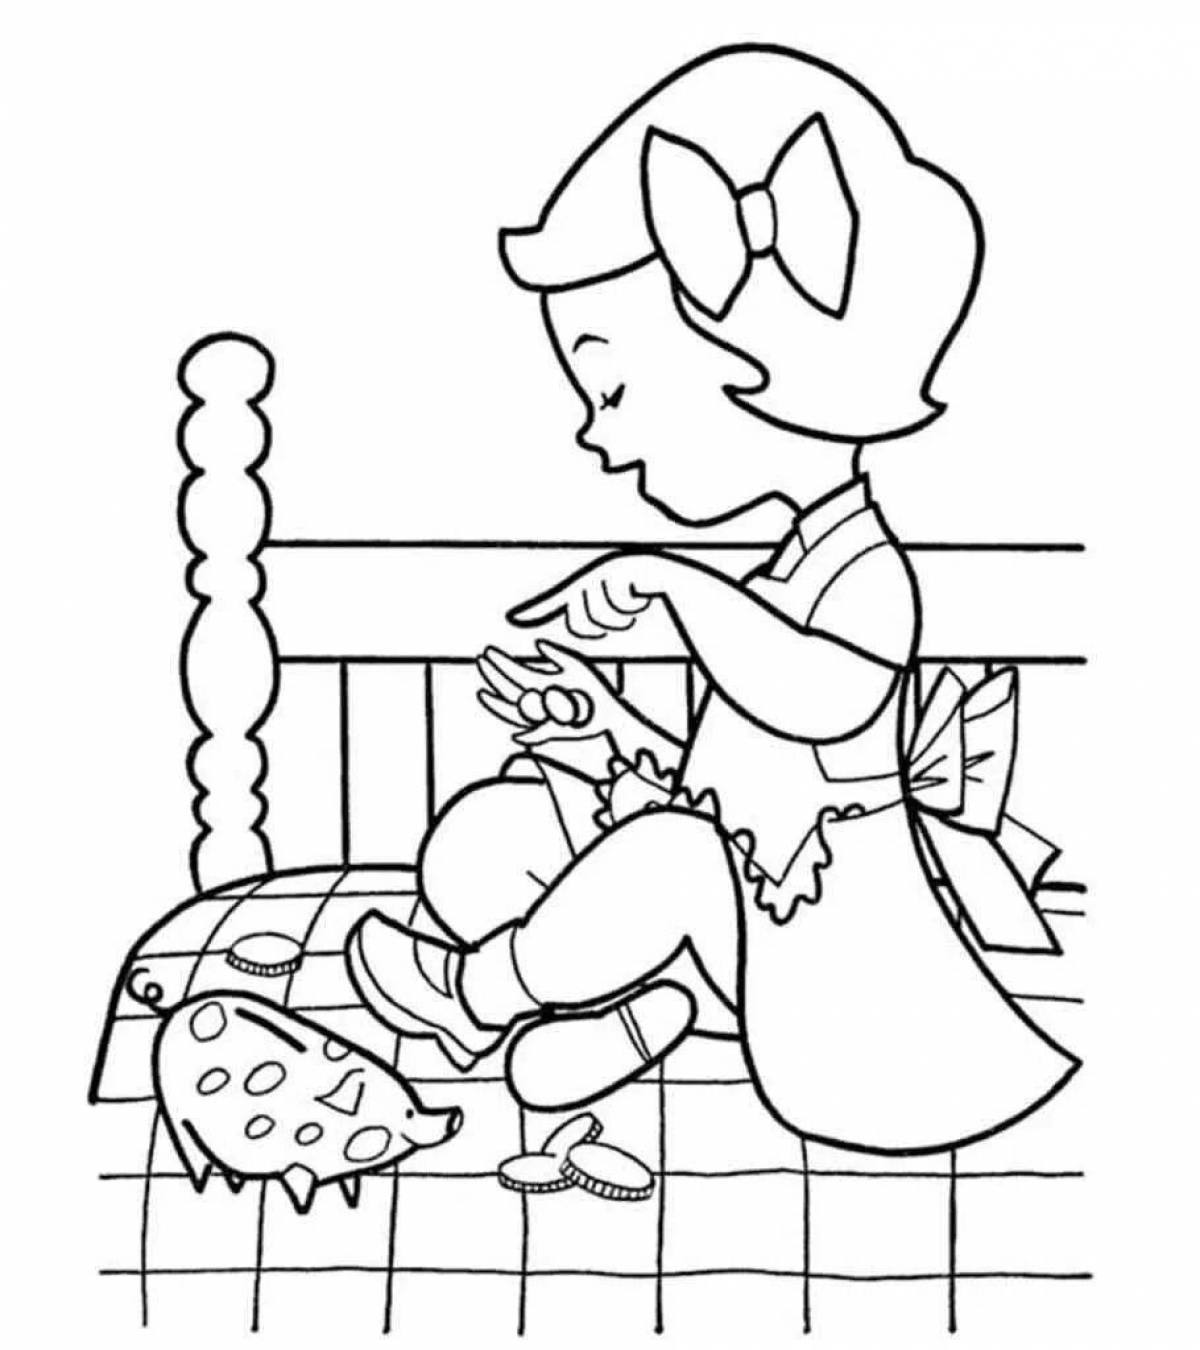 Financial literacy grade 3 coloring page